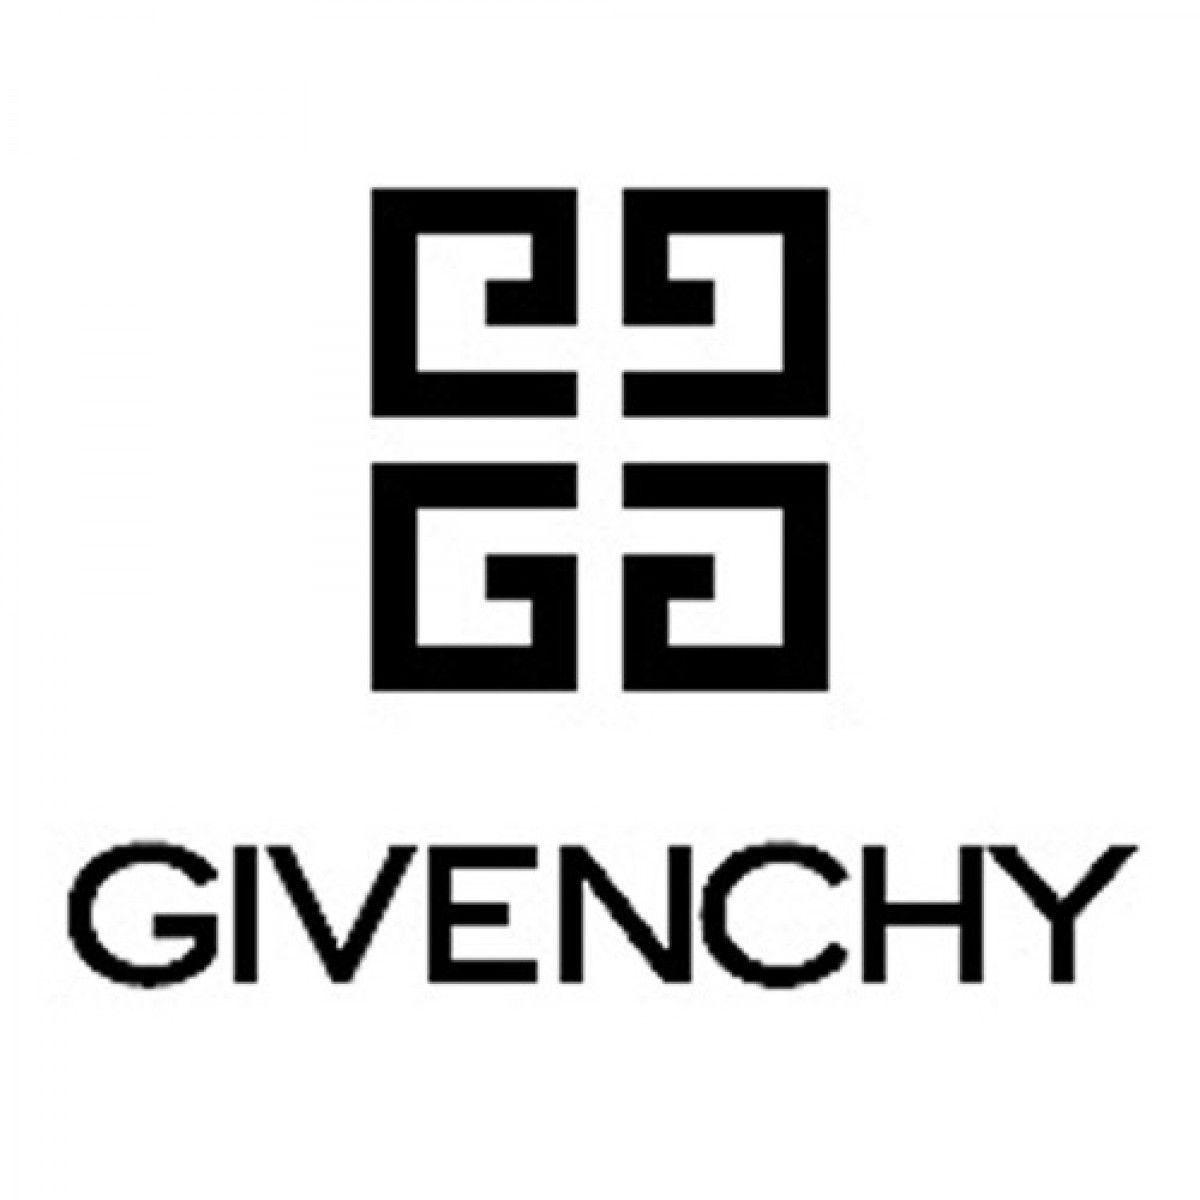 Expensive Fashion Logo - Gatsby would wear very expensive brands such as Givenchy | Brands ...